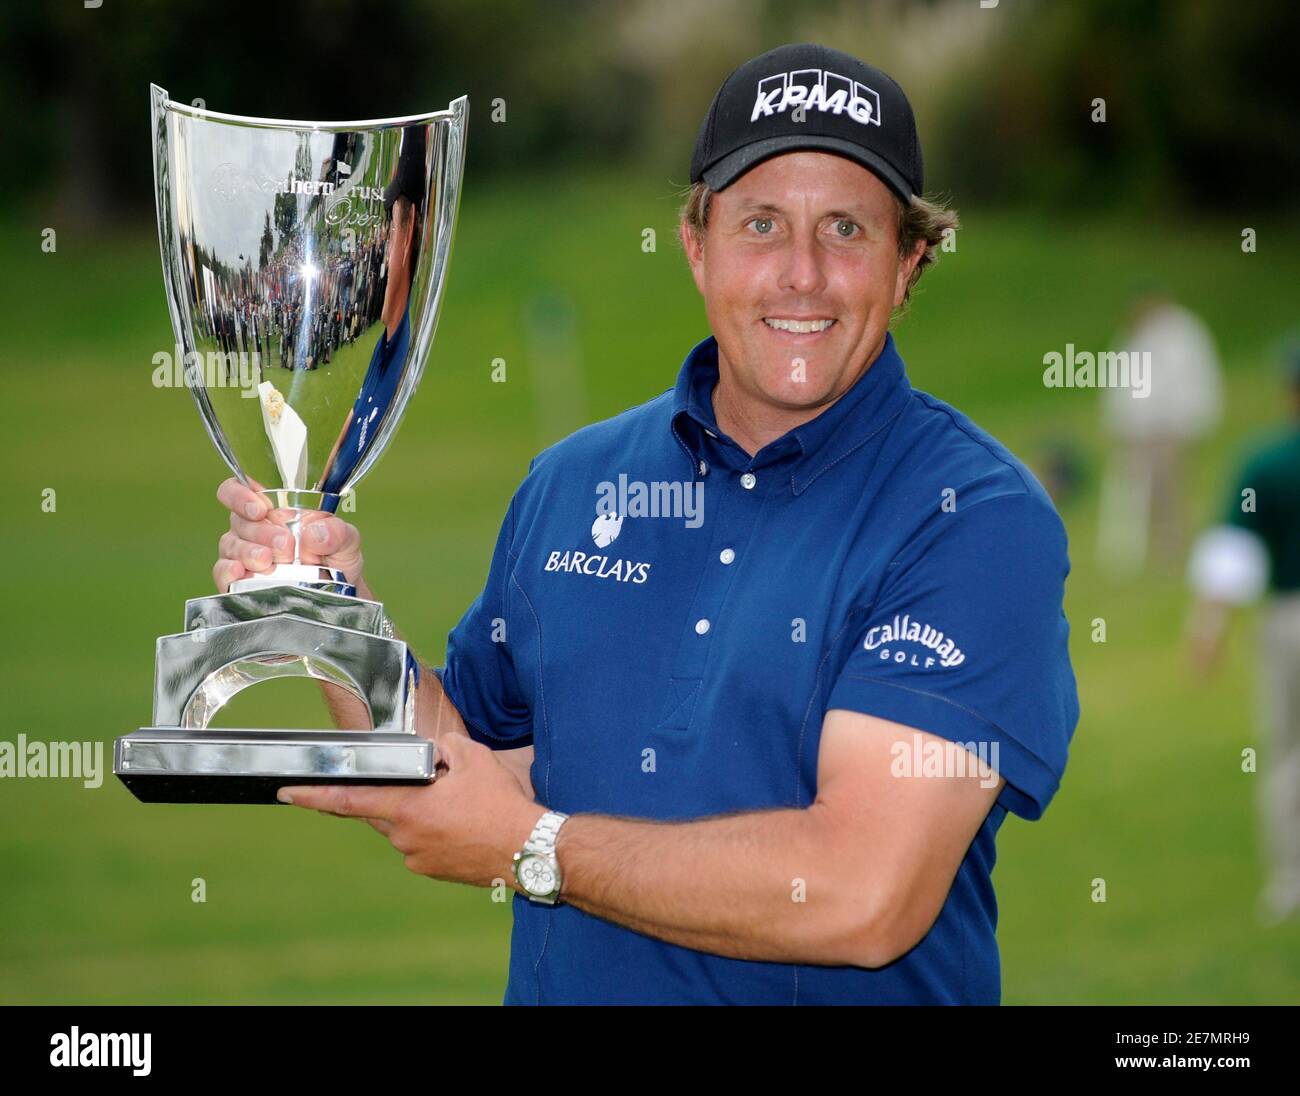 Golfer Phil Mickelson of the U.S. celebrates his victory after winning the Northern Trust Open golf tournament trophy in the Pacific Palisades area of Los Angeles February 22, 2009. REUTERS/Gus Ruelas (UNITED STATES) Stock Photo